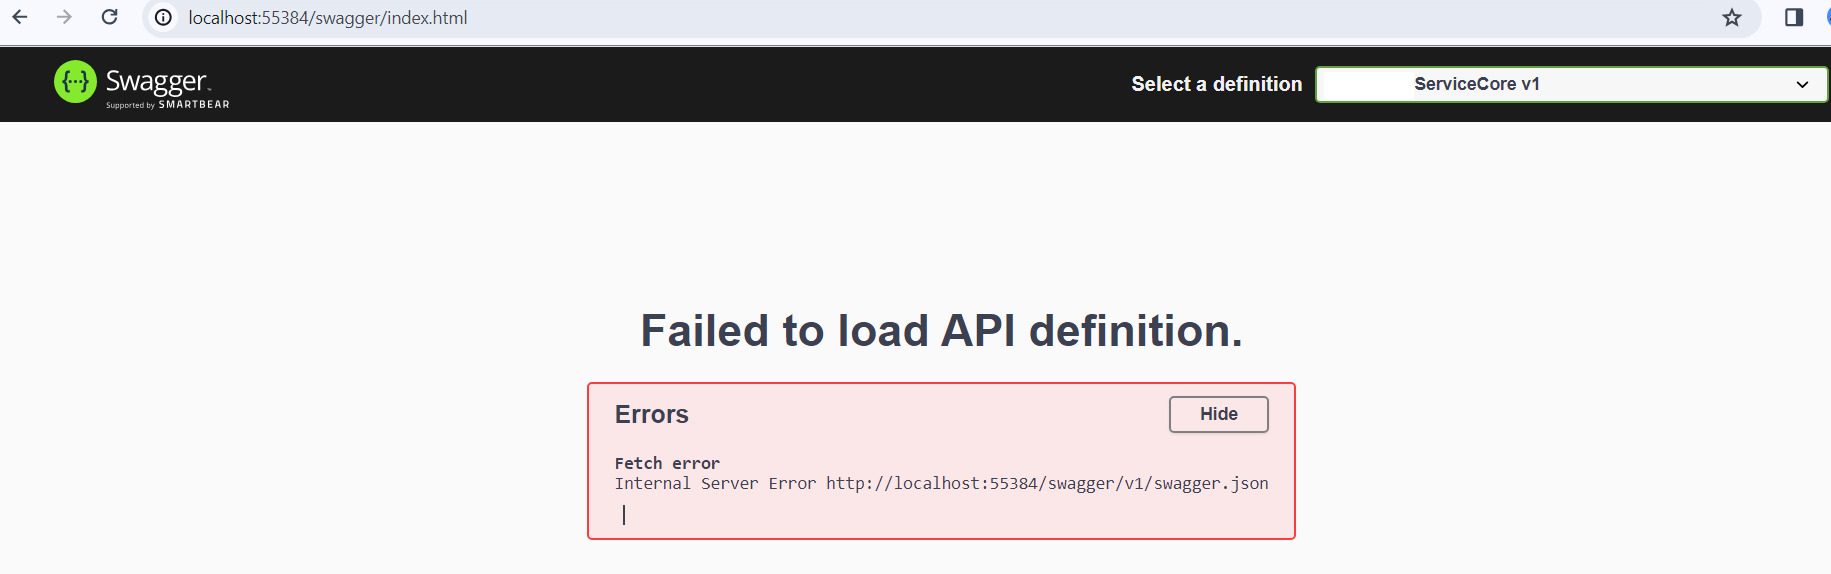 Failed to load definition error in Swagger